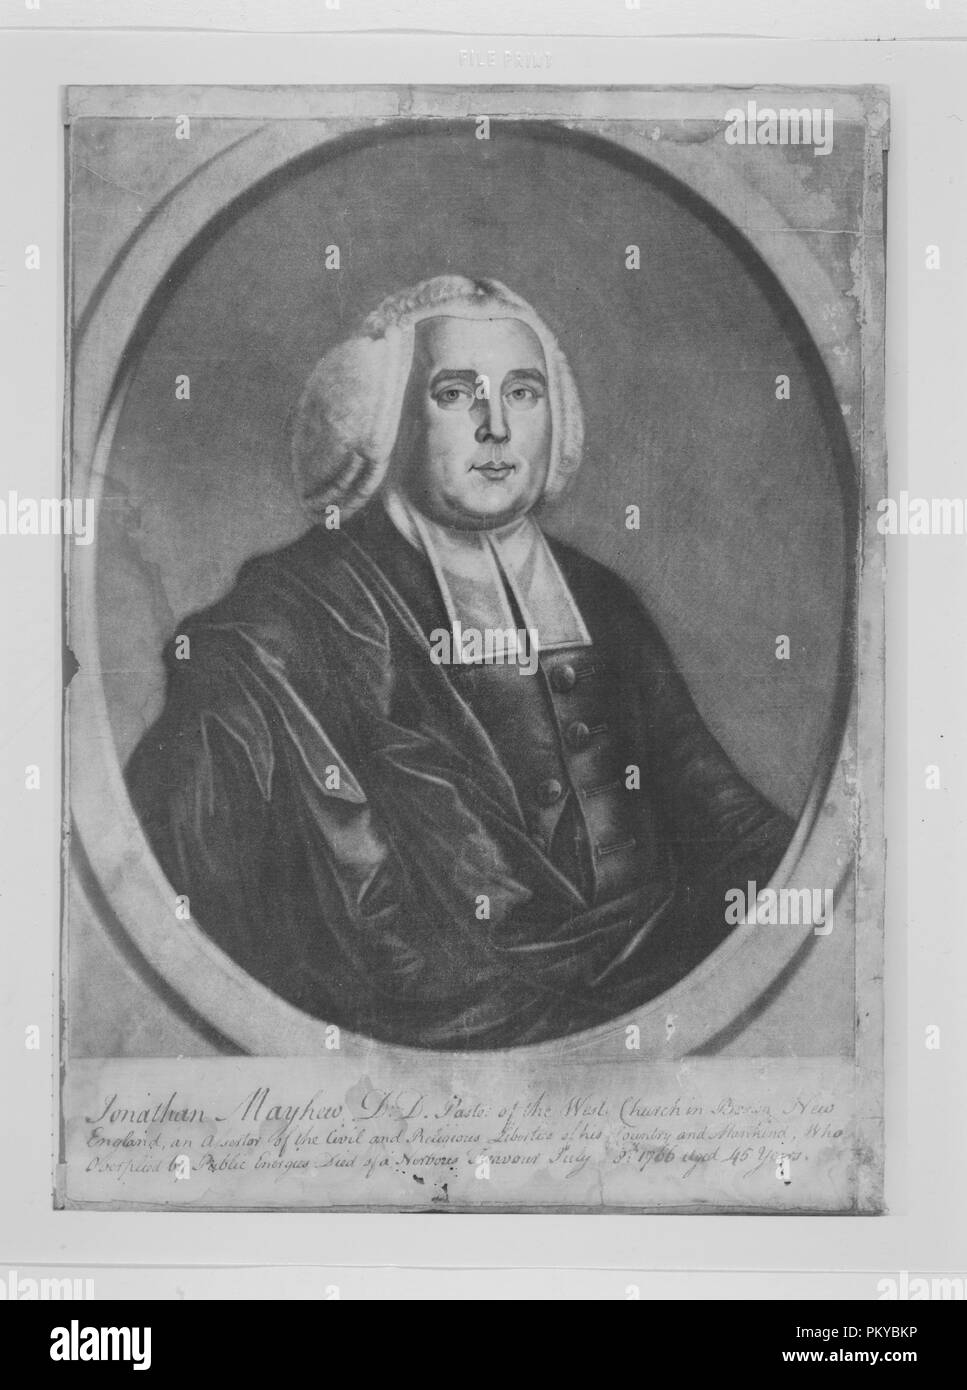 Jonathan Mayhew, D. D. Pastor of the West Church in Boston, New England. Artist: Painted and engraved by Richard Jennys, Jr. (American, active 1766-1801). Dimensions: irregularly trimmed to plate line: 14 1/4 x 10 1/4 in. (36.2 x 26 cm). Printer: Printed and sold by Nathaniel Hurd (American, Boston, Massachusetts 1729/30-1777 Boston, Massachusetts). Sitter: Jonathan Mayhew (American, Martha's Vineyard, Massachusetts 1720-1766 Boston, Massachusetts). Date: 1766. Museum: Metropolitan Museum of Art, New York, USA. Stock Photo